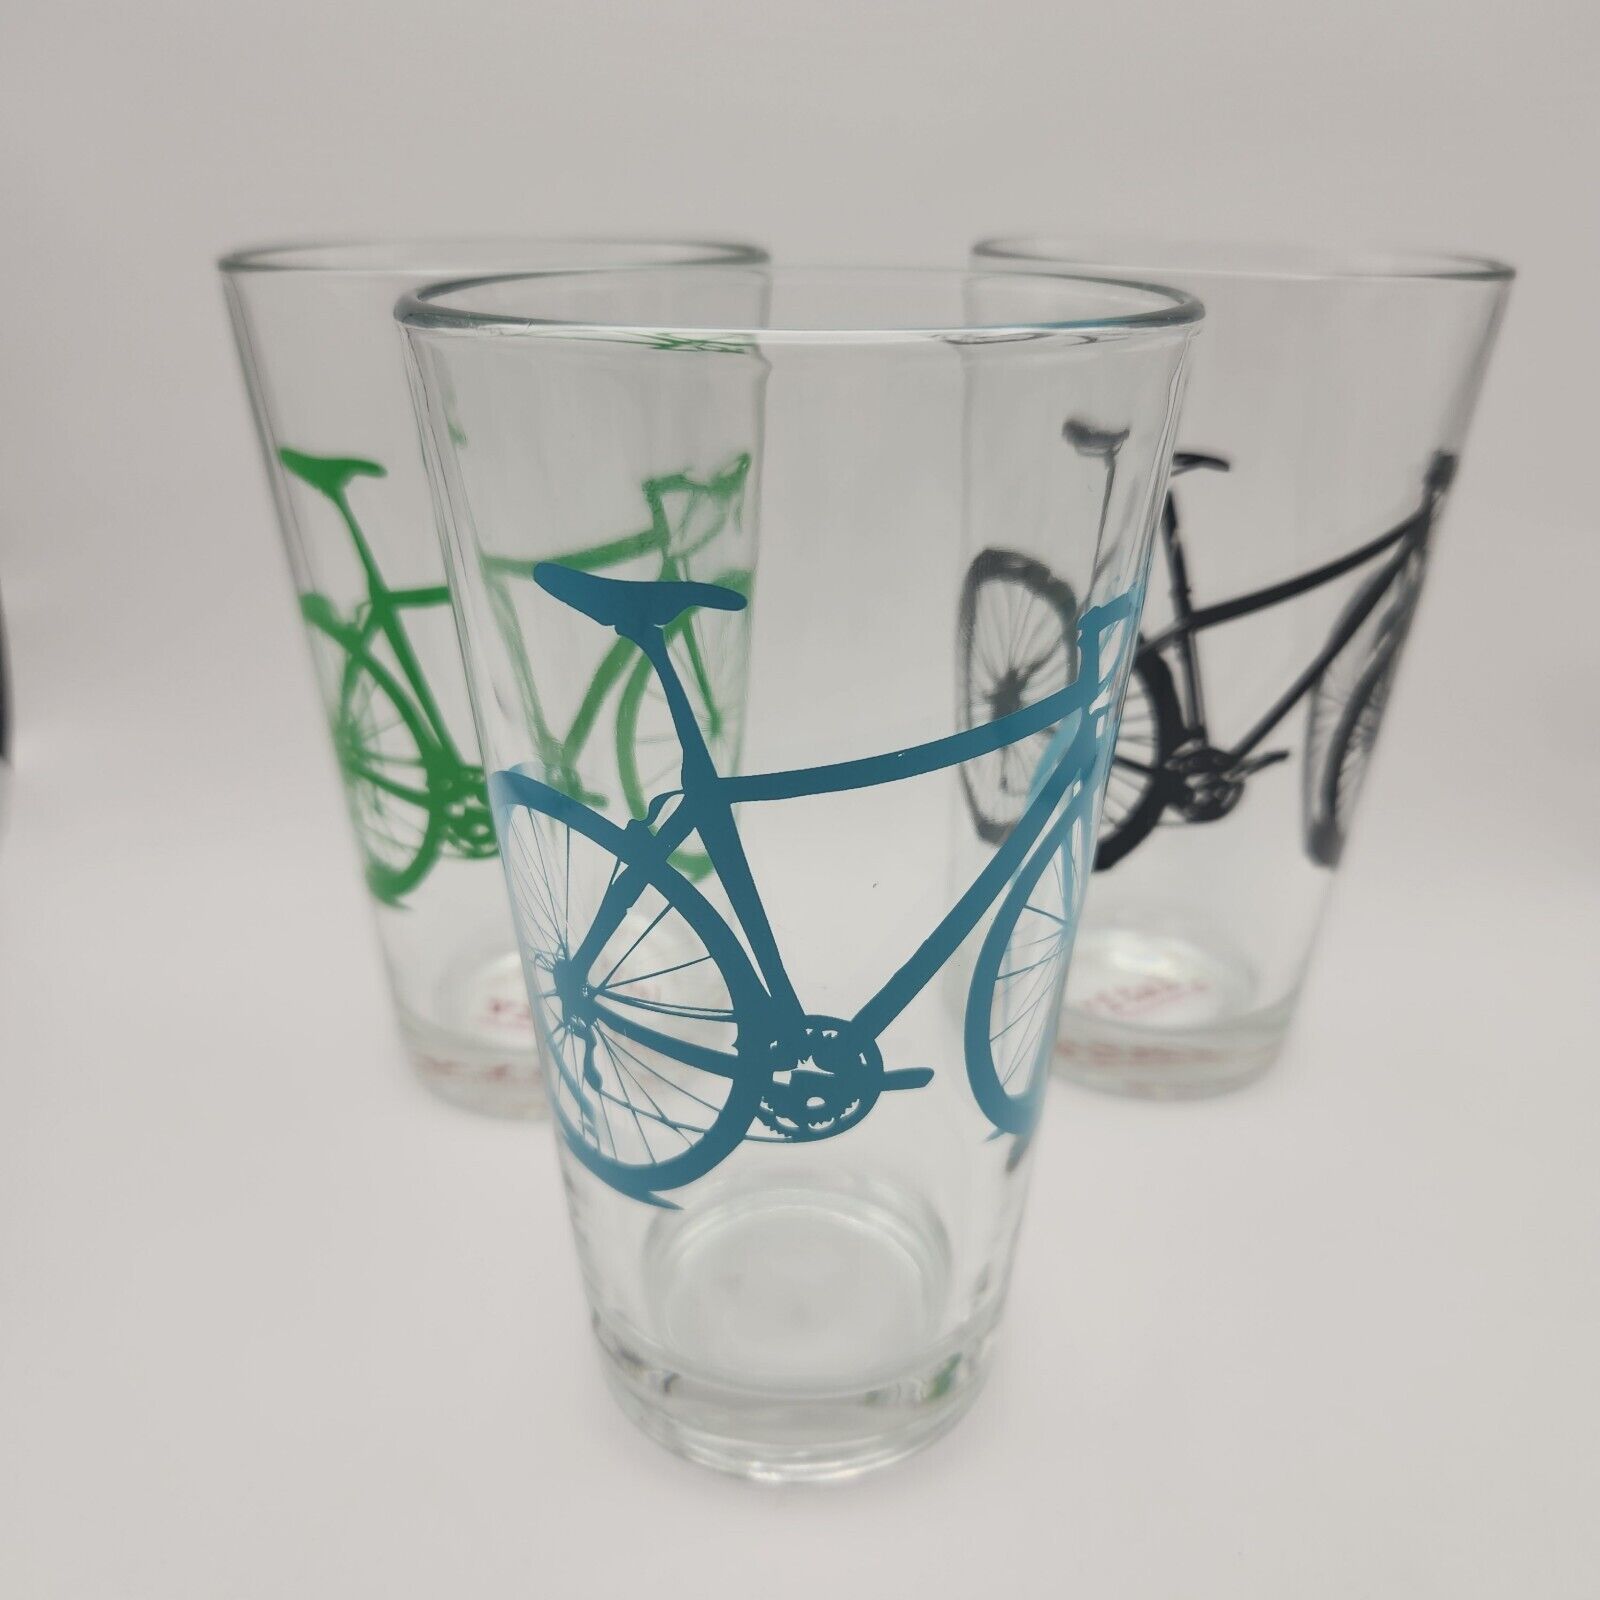 3 Vital Industries Bicycle Drinking Beer Glass 6” Tall Green, Blue, & Black